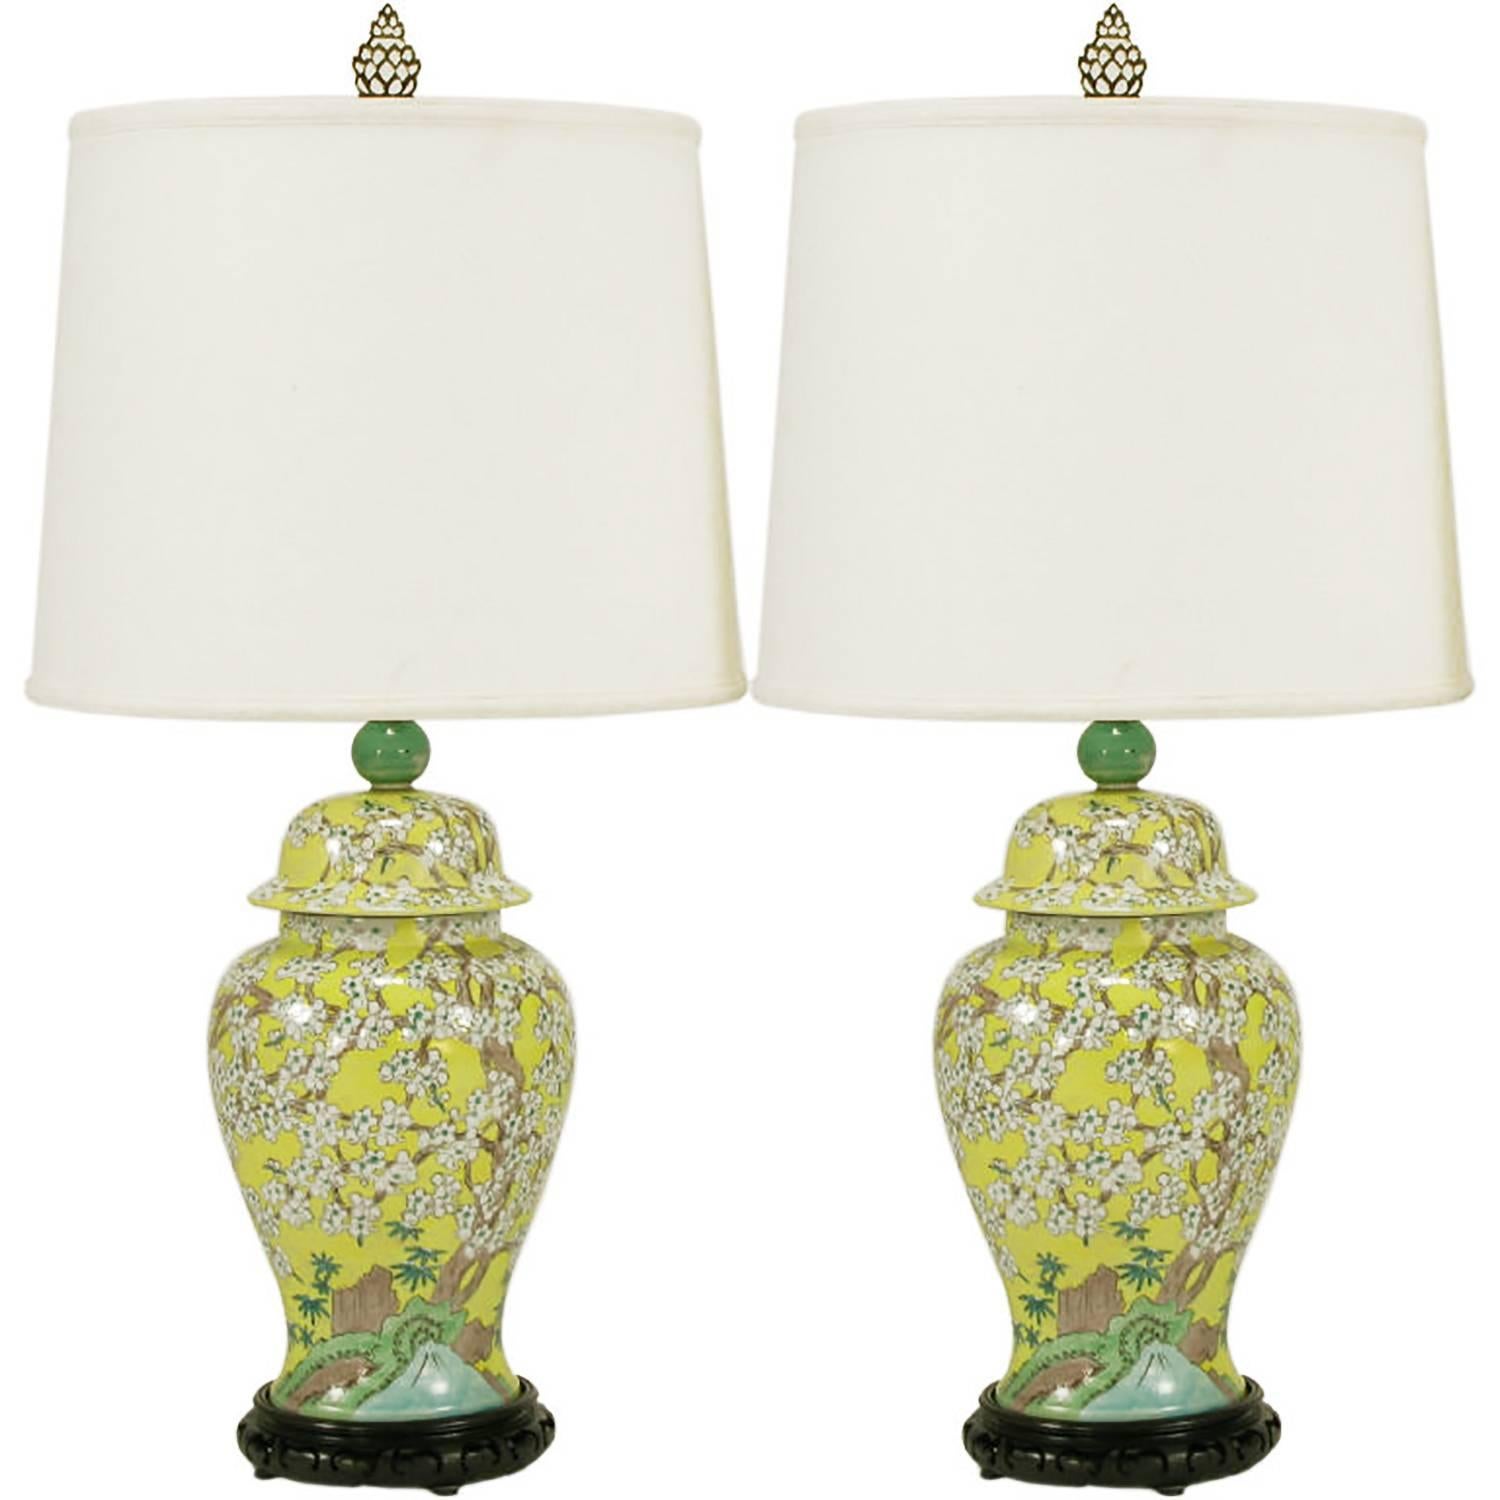 Pair of Imported Hand-Painted Yellow Glaze Ginger Jar Table Lamps